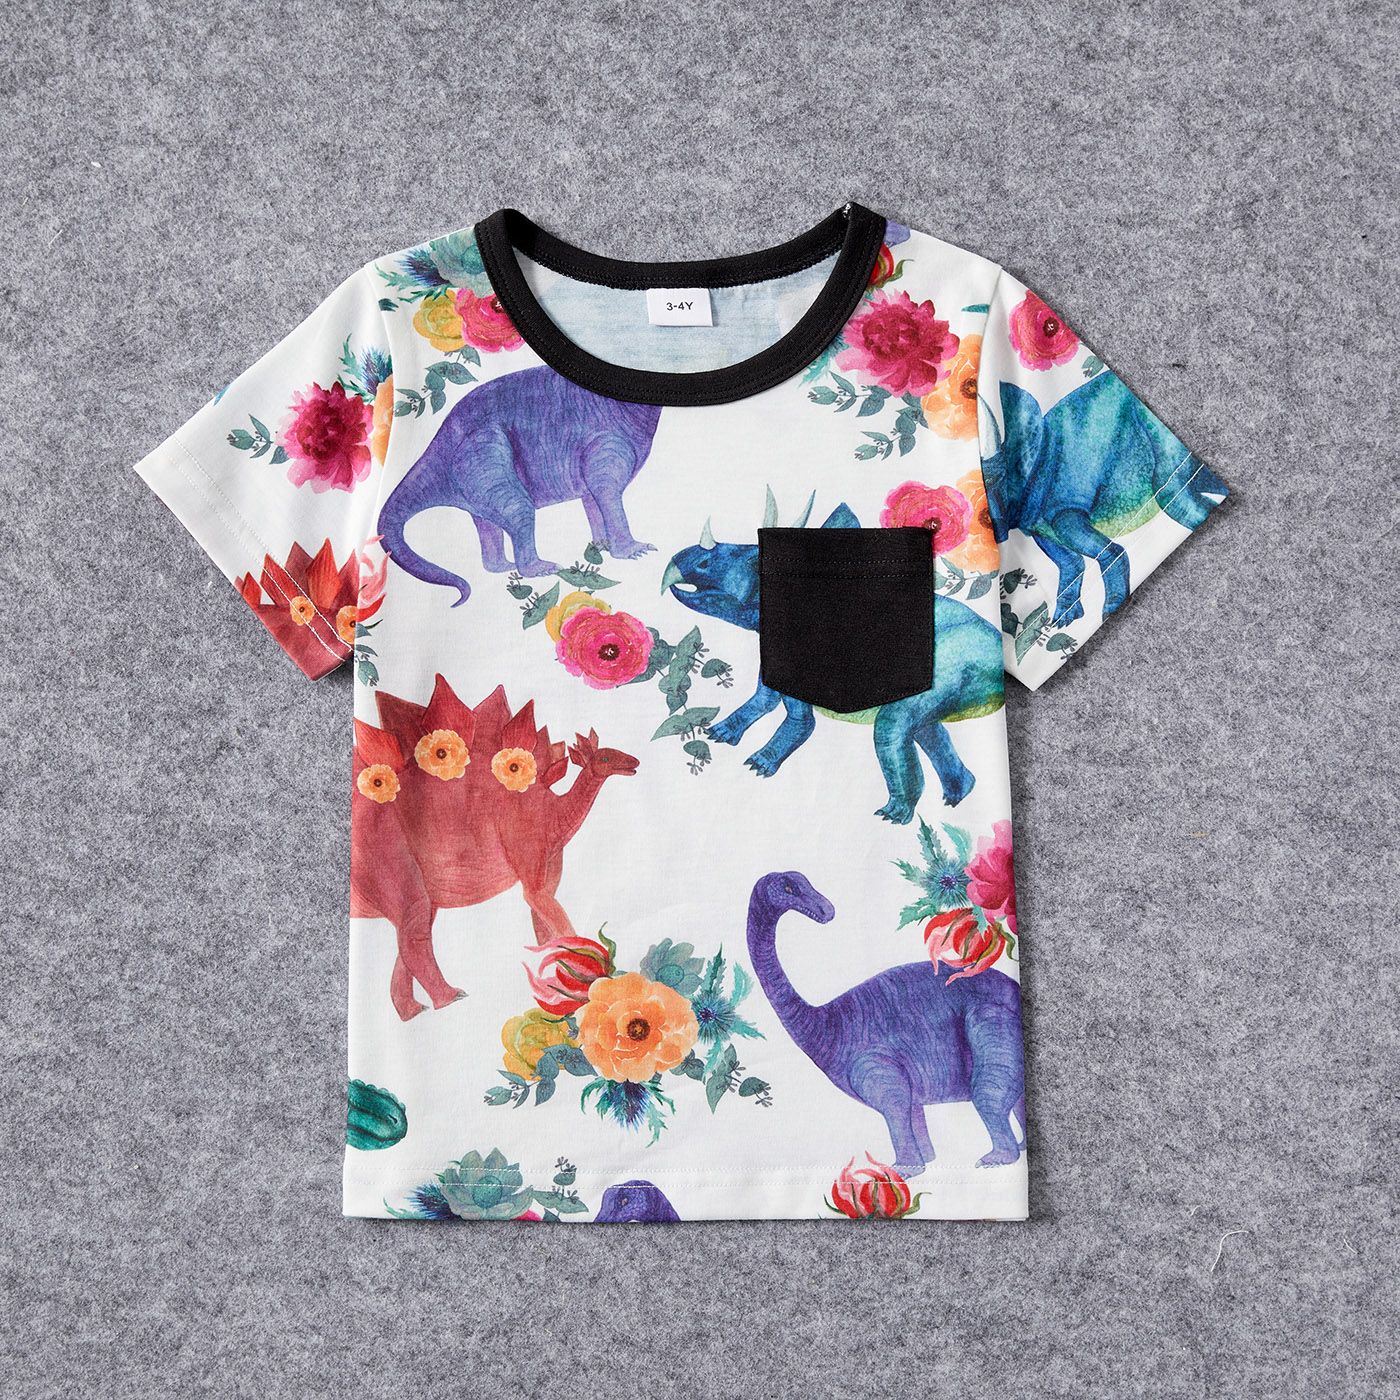 Family Matching Solid Short-sleeve Spliced Allover Dinosaur Print Belted Dresses And T-shirts Sets